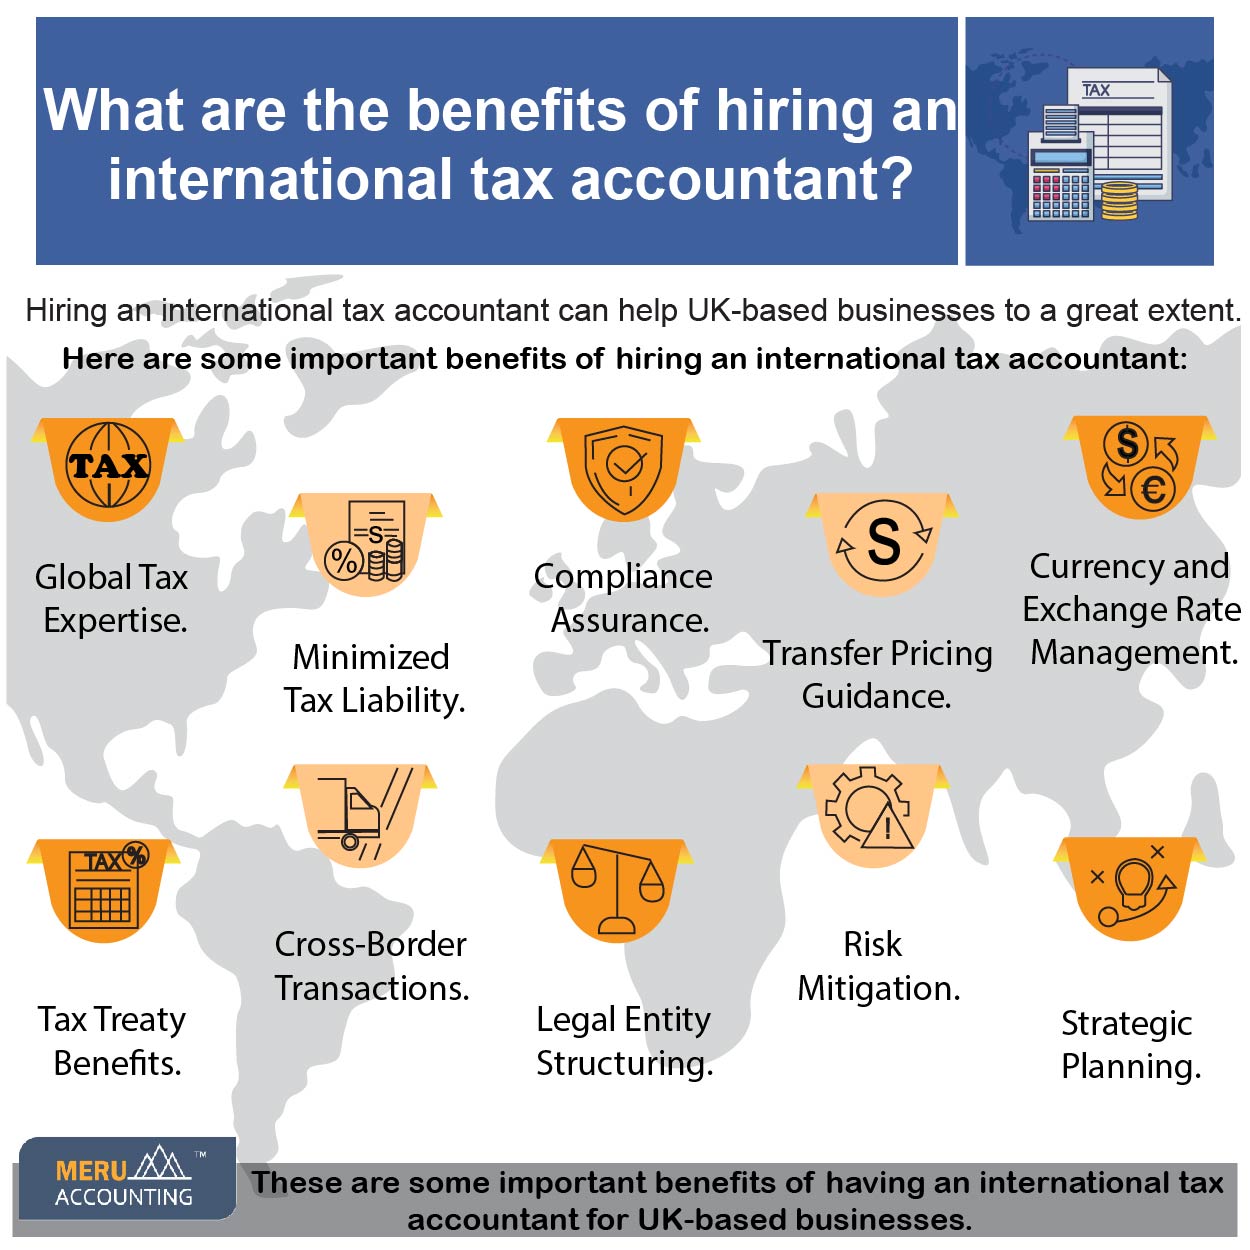 What are the benefits of hiring an international tax accountant 1250 by 1250 01